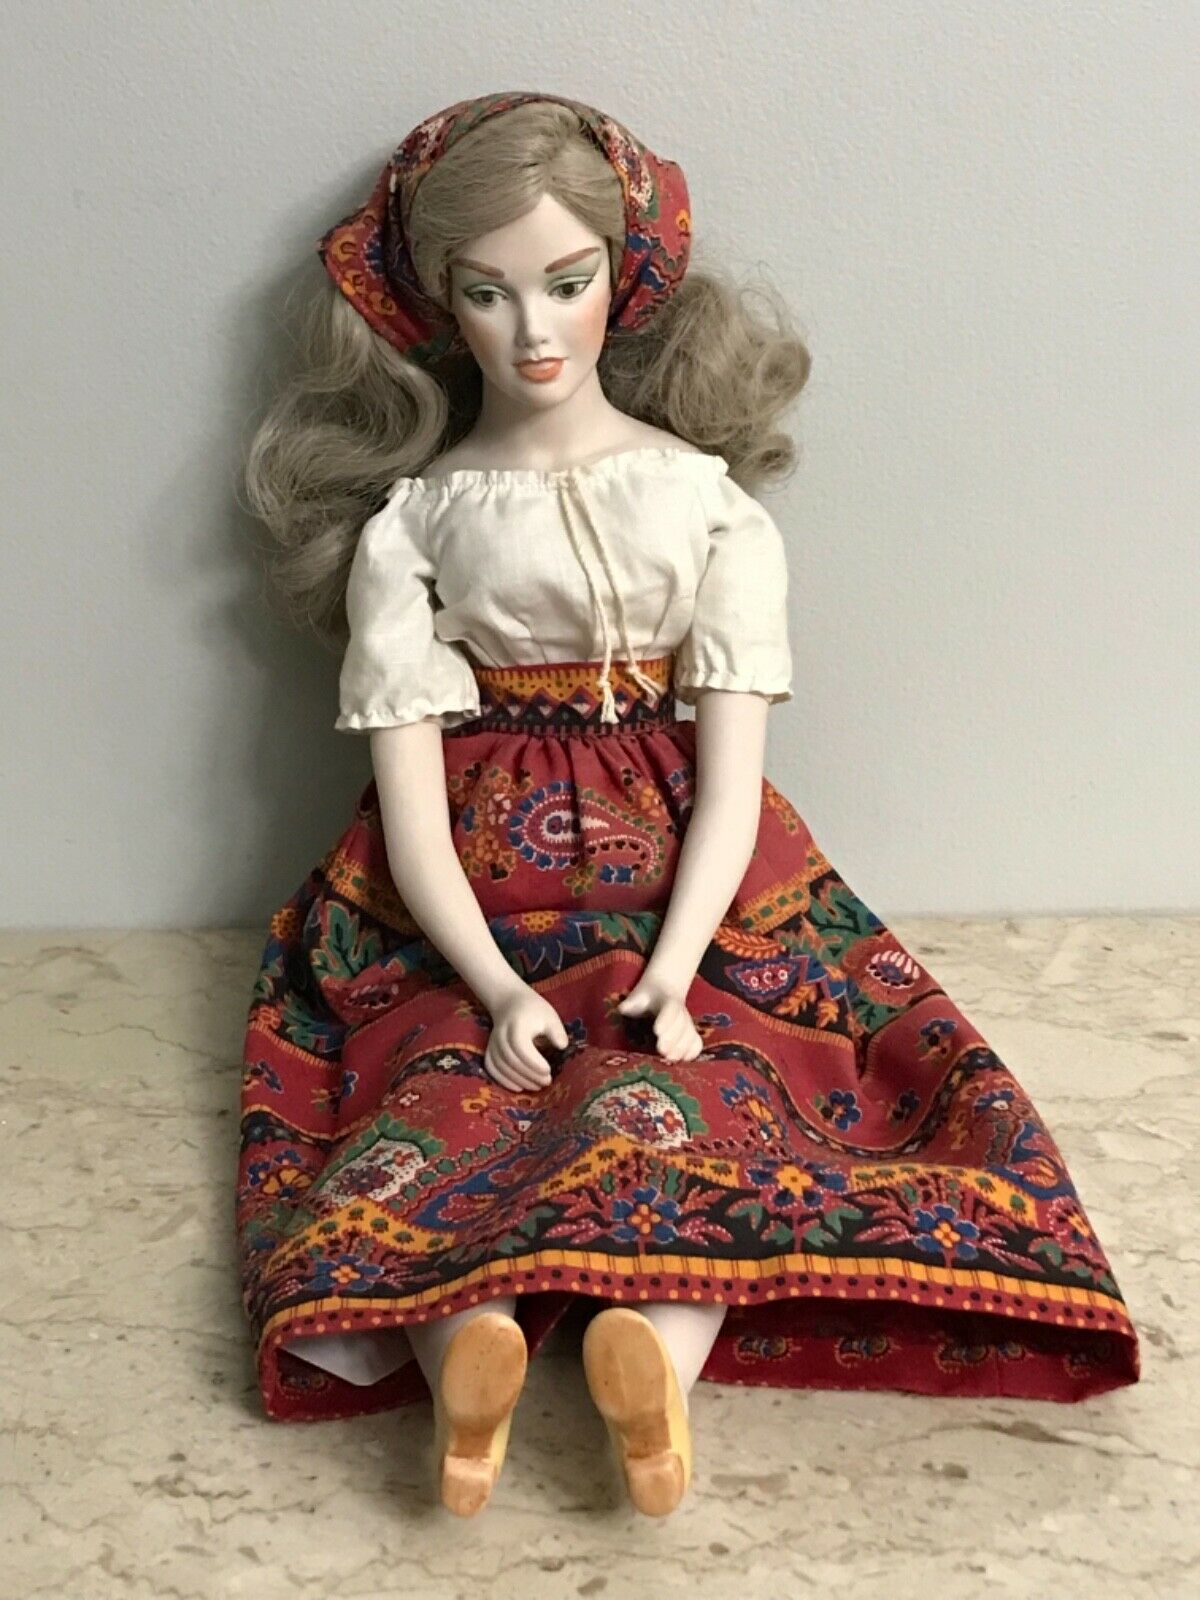 Lovely Vintage 18" Ooak Artist Peasant Doll With Bisque Head & Cloth Body Agatha